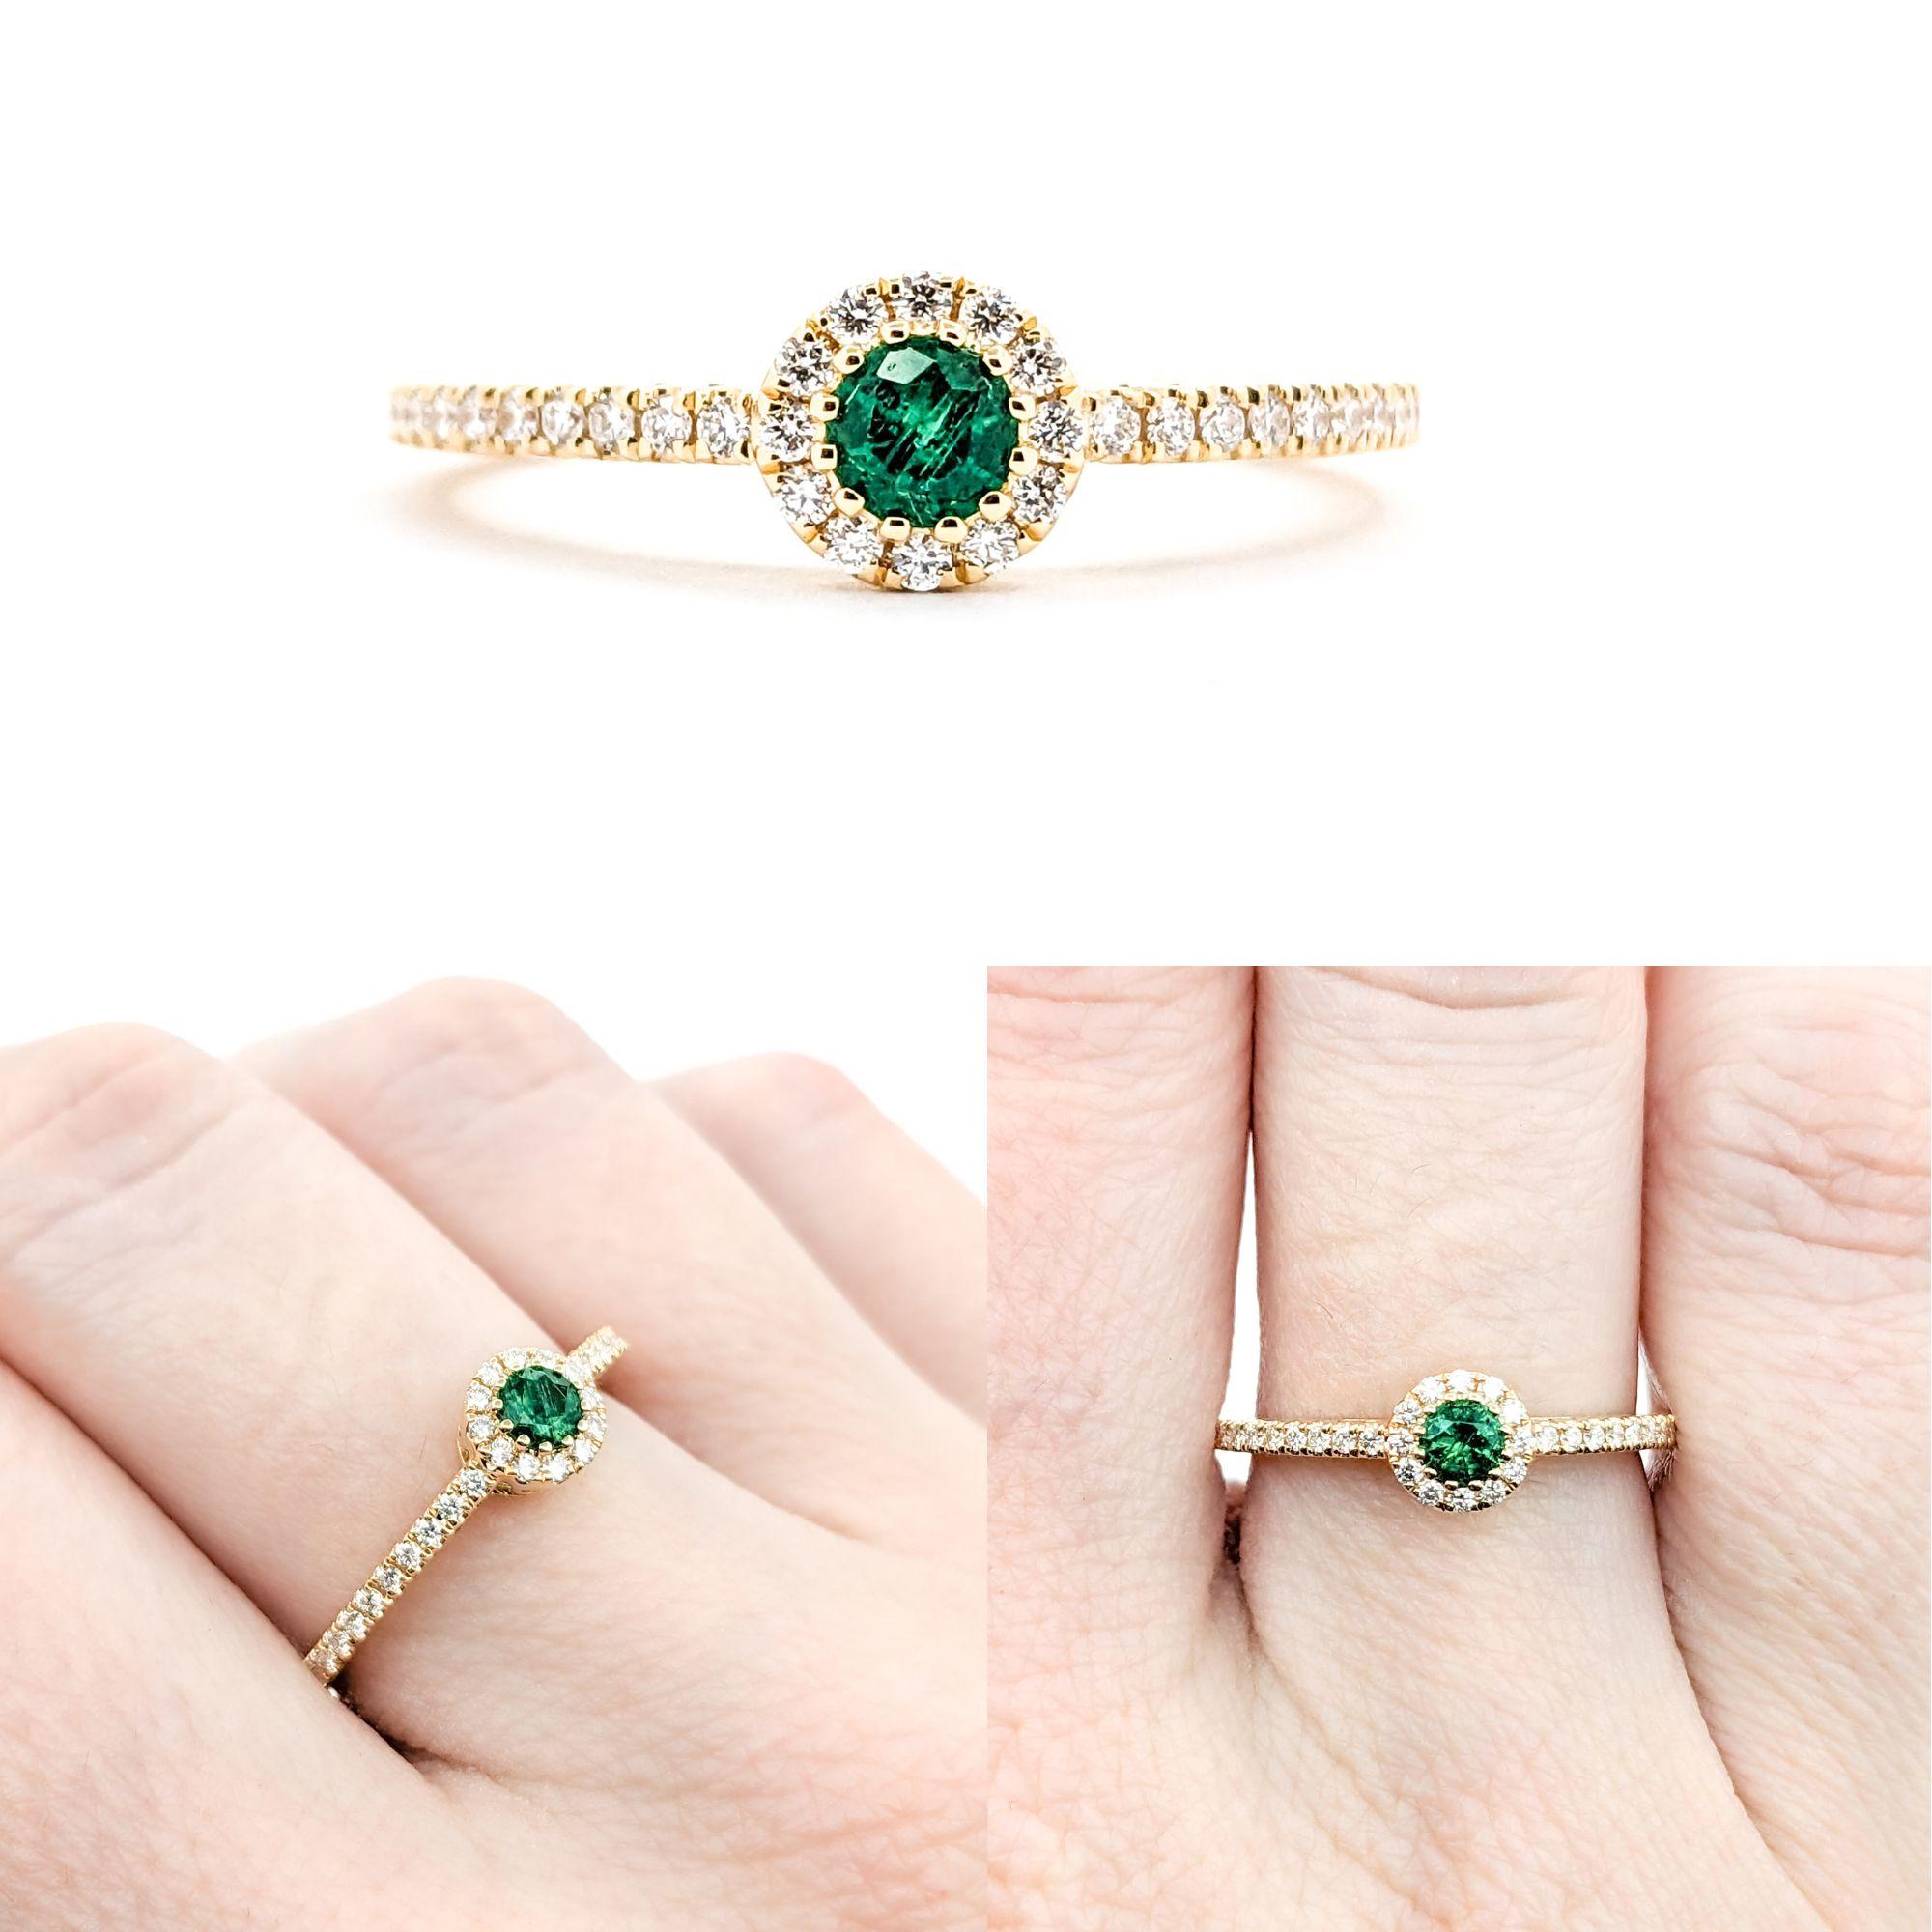 0.13ct green Emerald and Diamond Halo in 18k Yellow Gold

This exquisite ring features a 0.13ct green Emerald centerpiece surrounded by 0.22ctw of round Diamonds. The Diamonds are of SI-I clarity and have a near colorless white hue, which